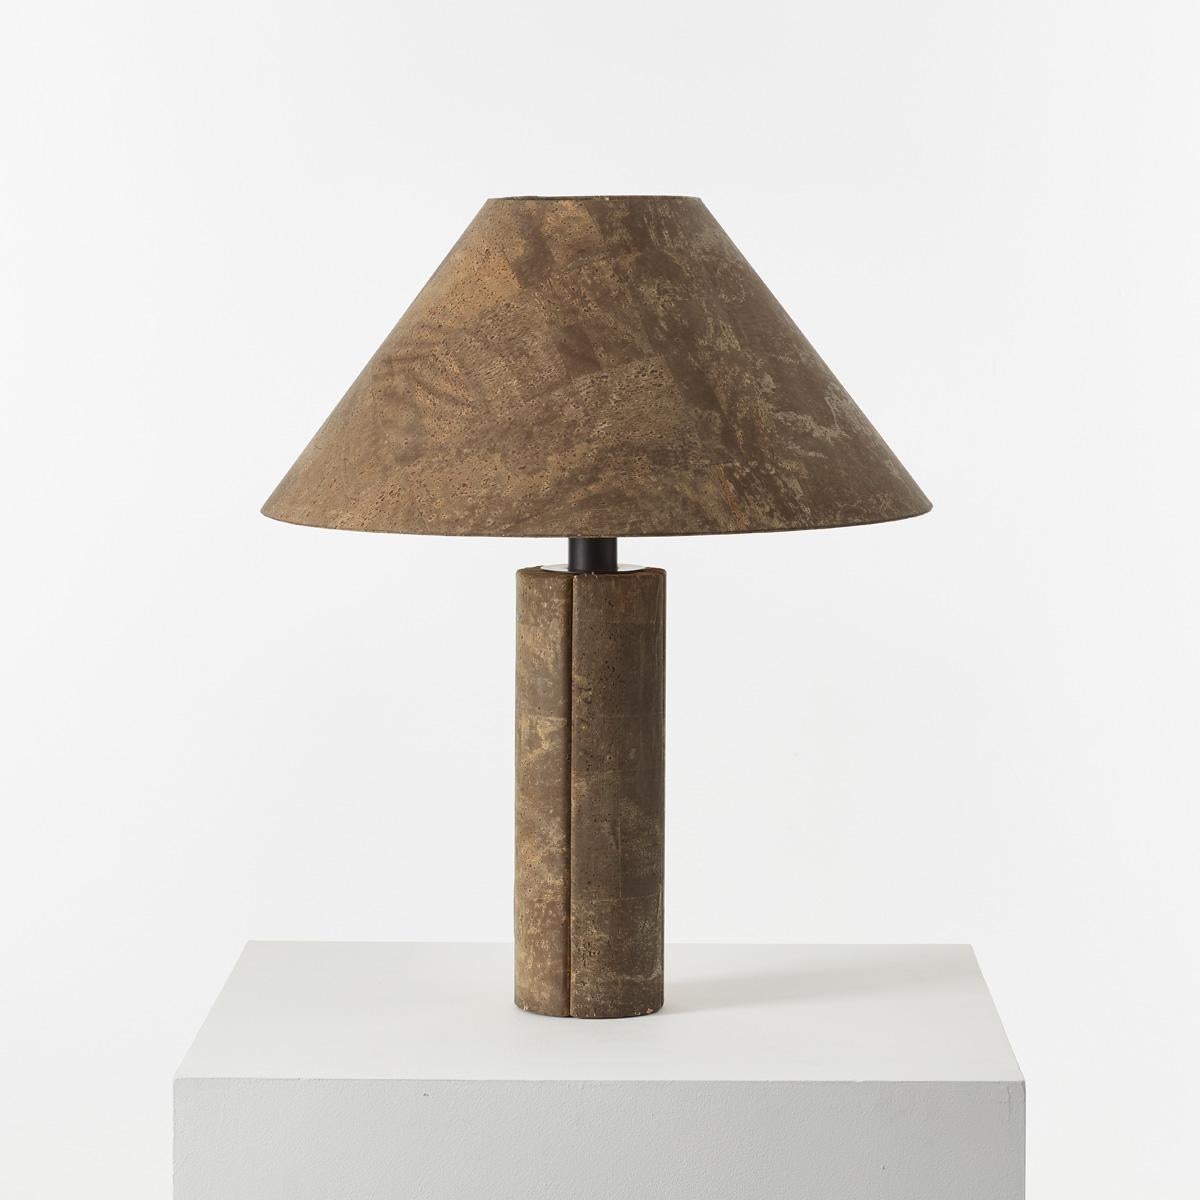 Pair of Ingo Maurer Cork Lamps for Design M, Germany 1974 In Good Condition For Sale In London, GB